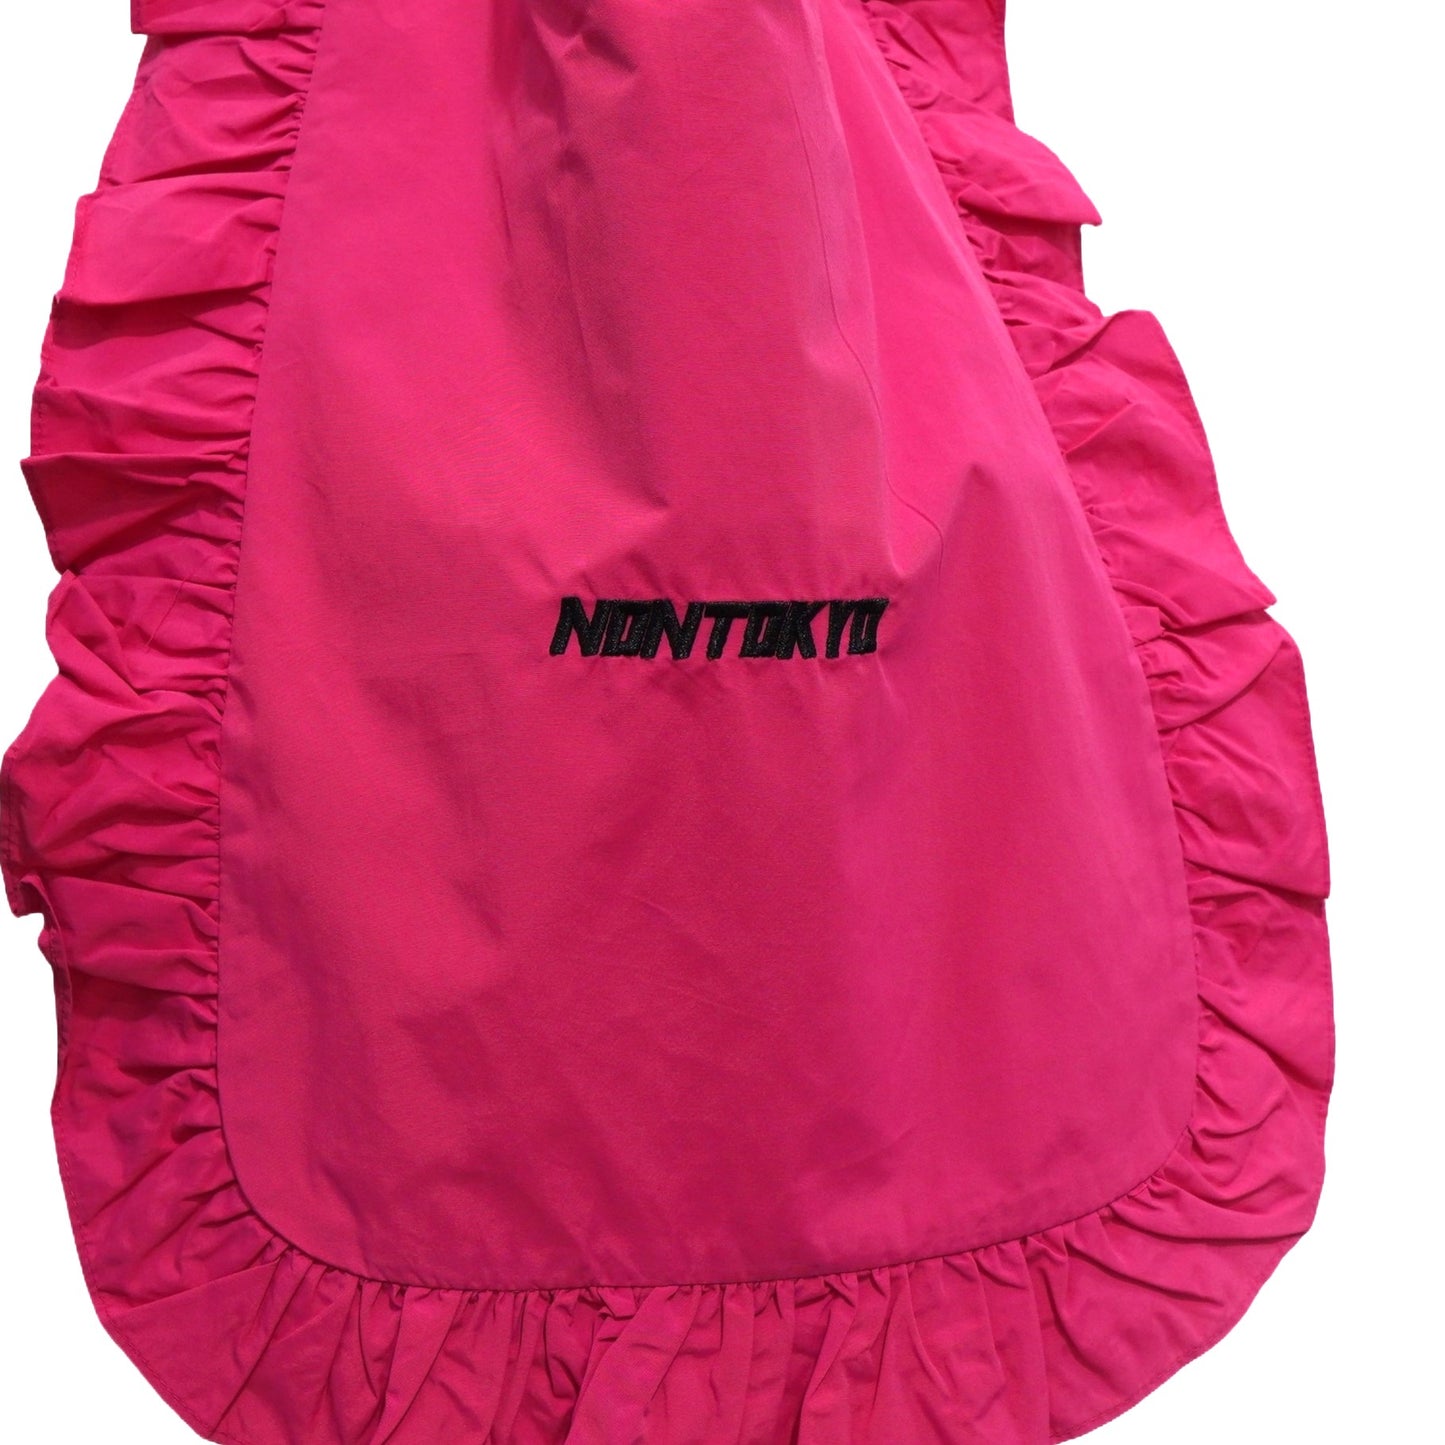 NON TOKYO / FRILL ECO BAG L (PINK) / 〈ノントーキョー〉フリルエコバッグ L (ピンク)